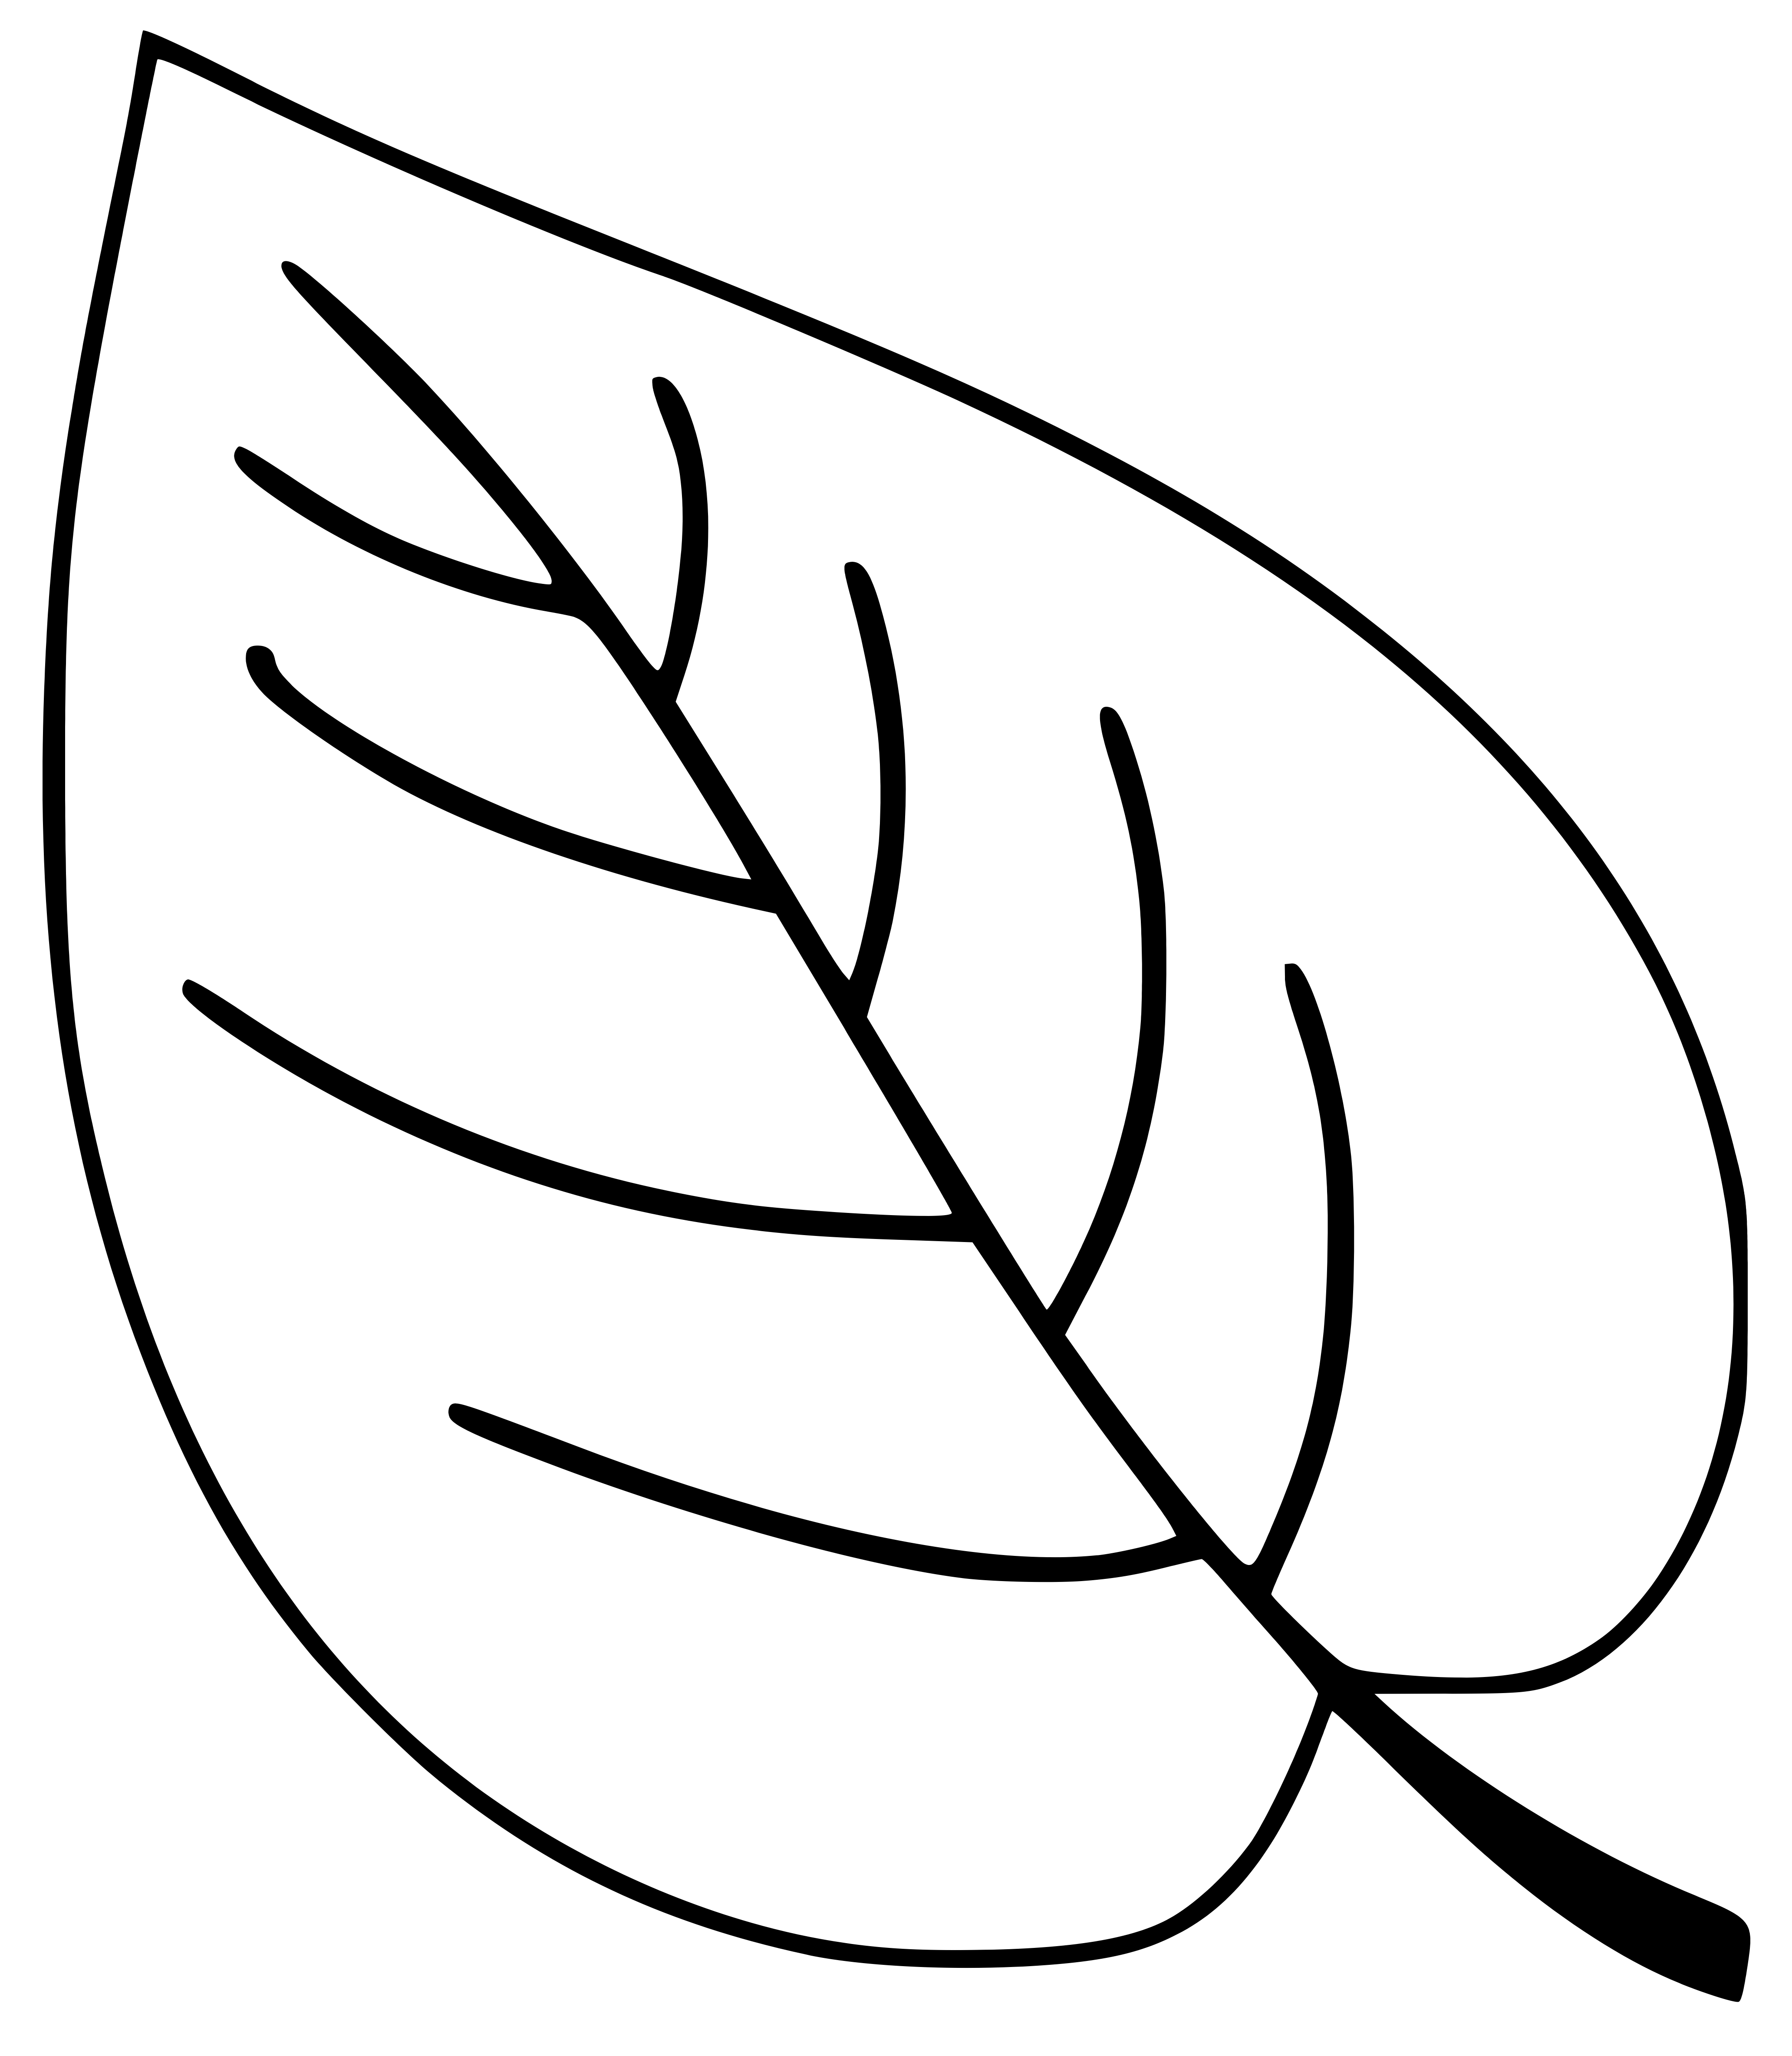 Leaf Coloring Pages 1